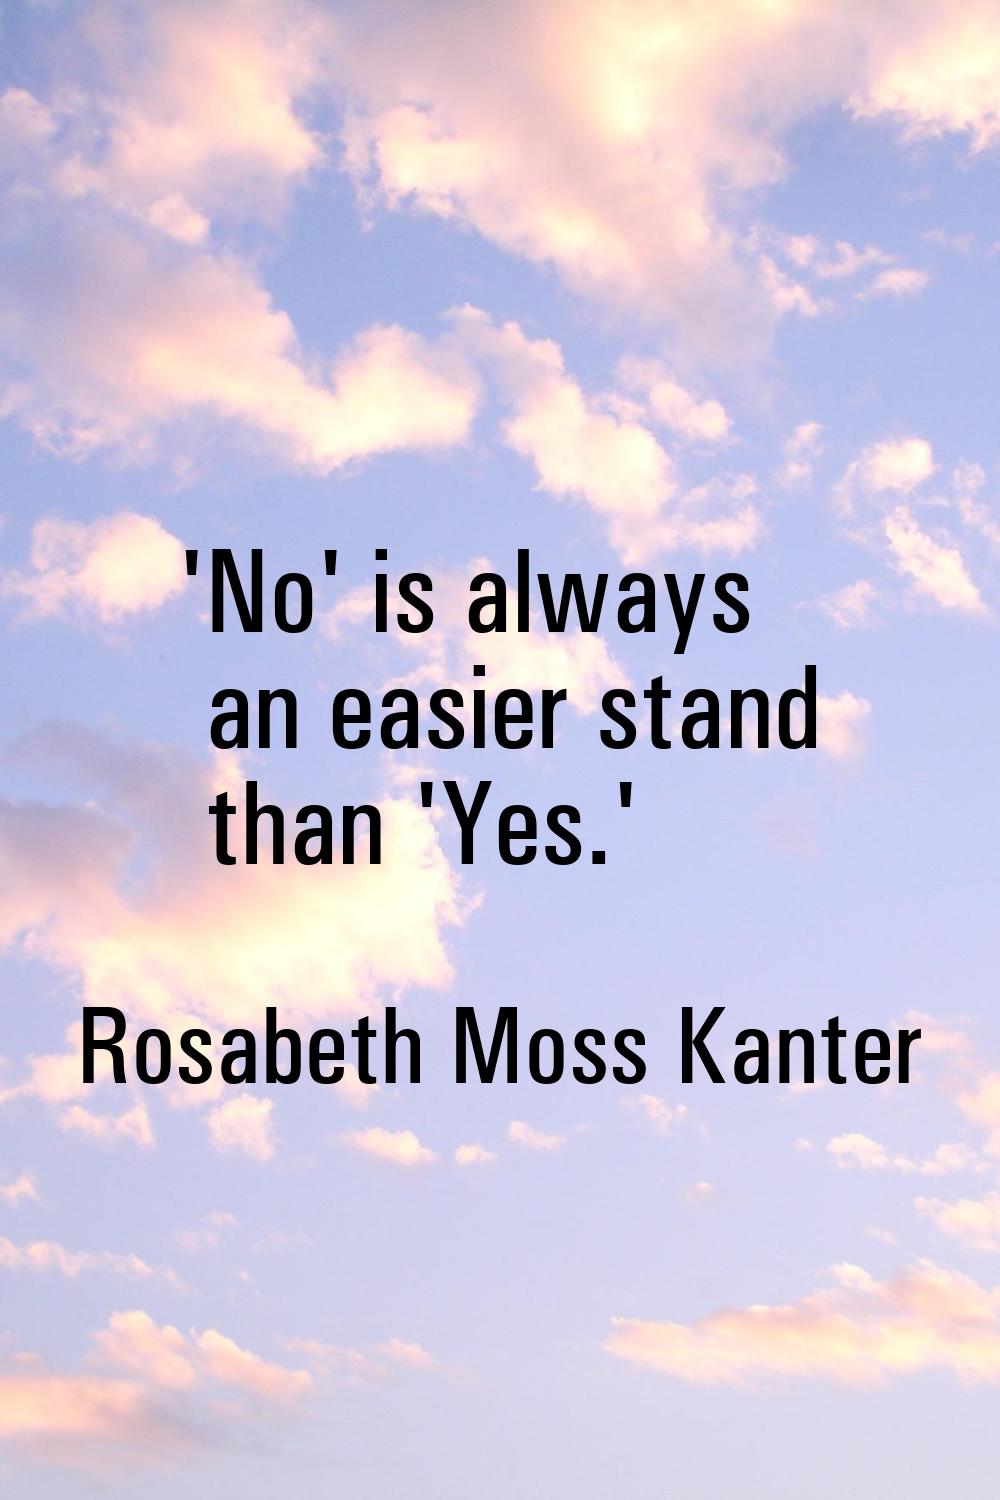 'No' is always an easier stand than 'Yes.'